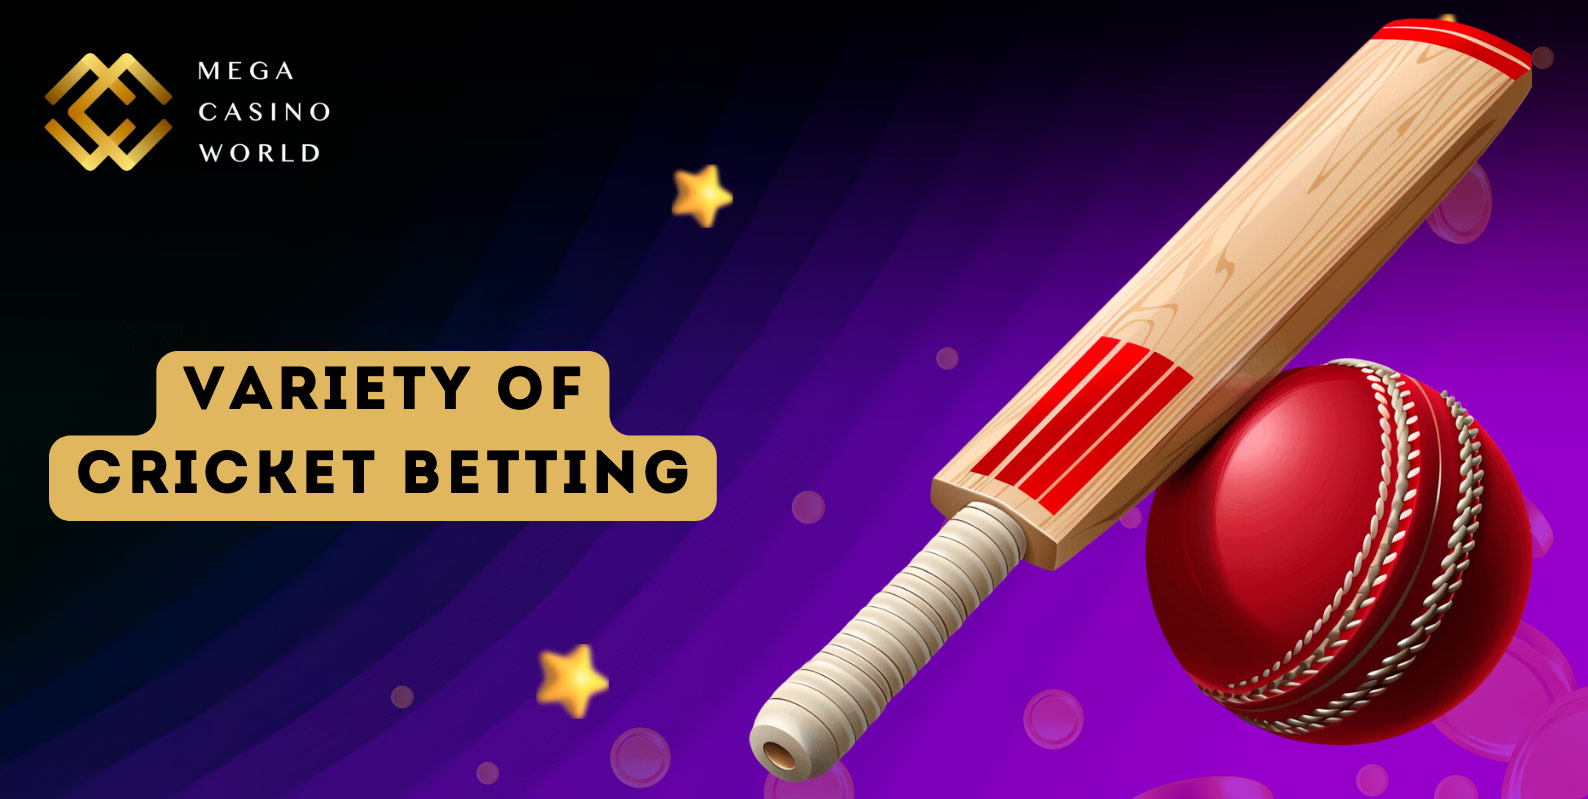 Experience a Wide Range of Cricket Betting Options at MCW Casino